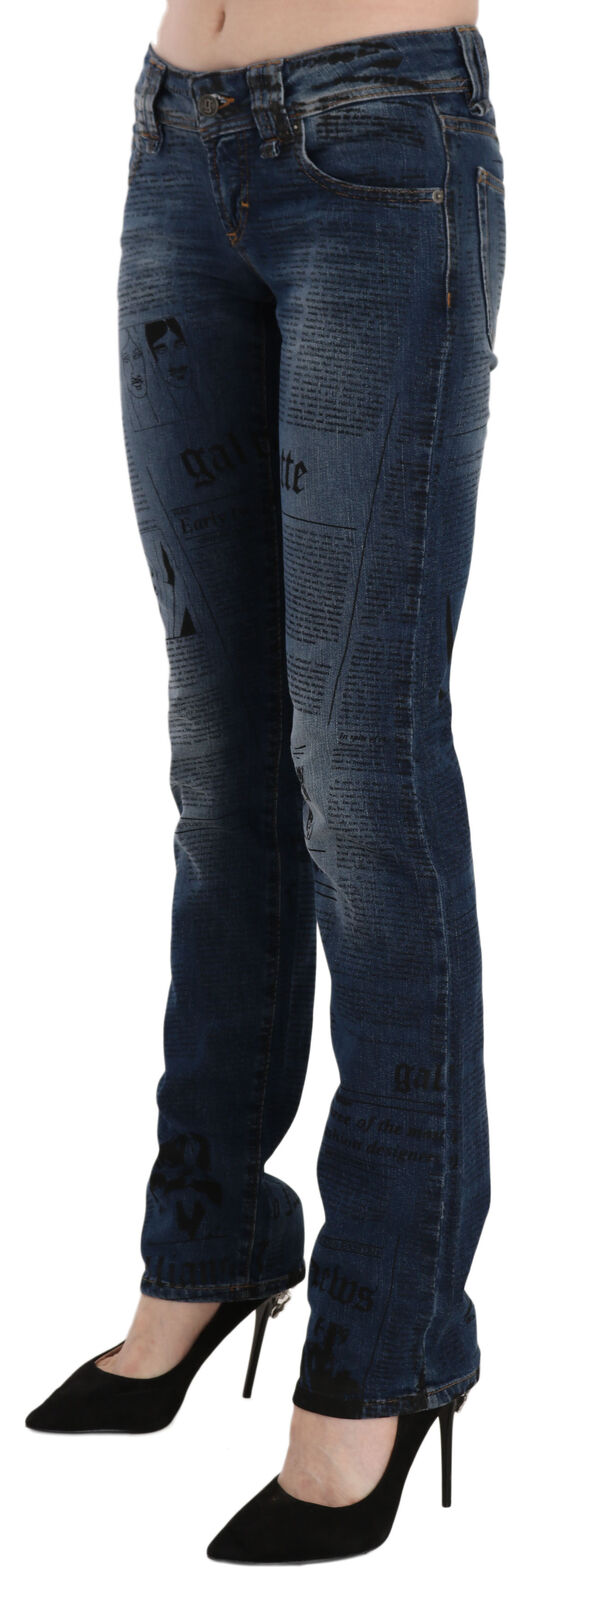 John Galliano Blue Newspaper Print Low Waist Skinny Denim Pants - Designed by John Galliano Available to Buy at a Discounted Price on Moon Behind The Hill Online Designer Discount Store